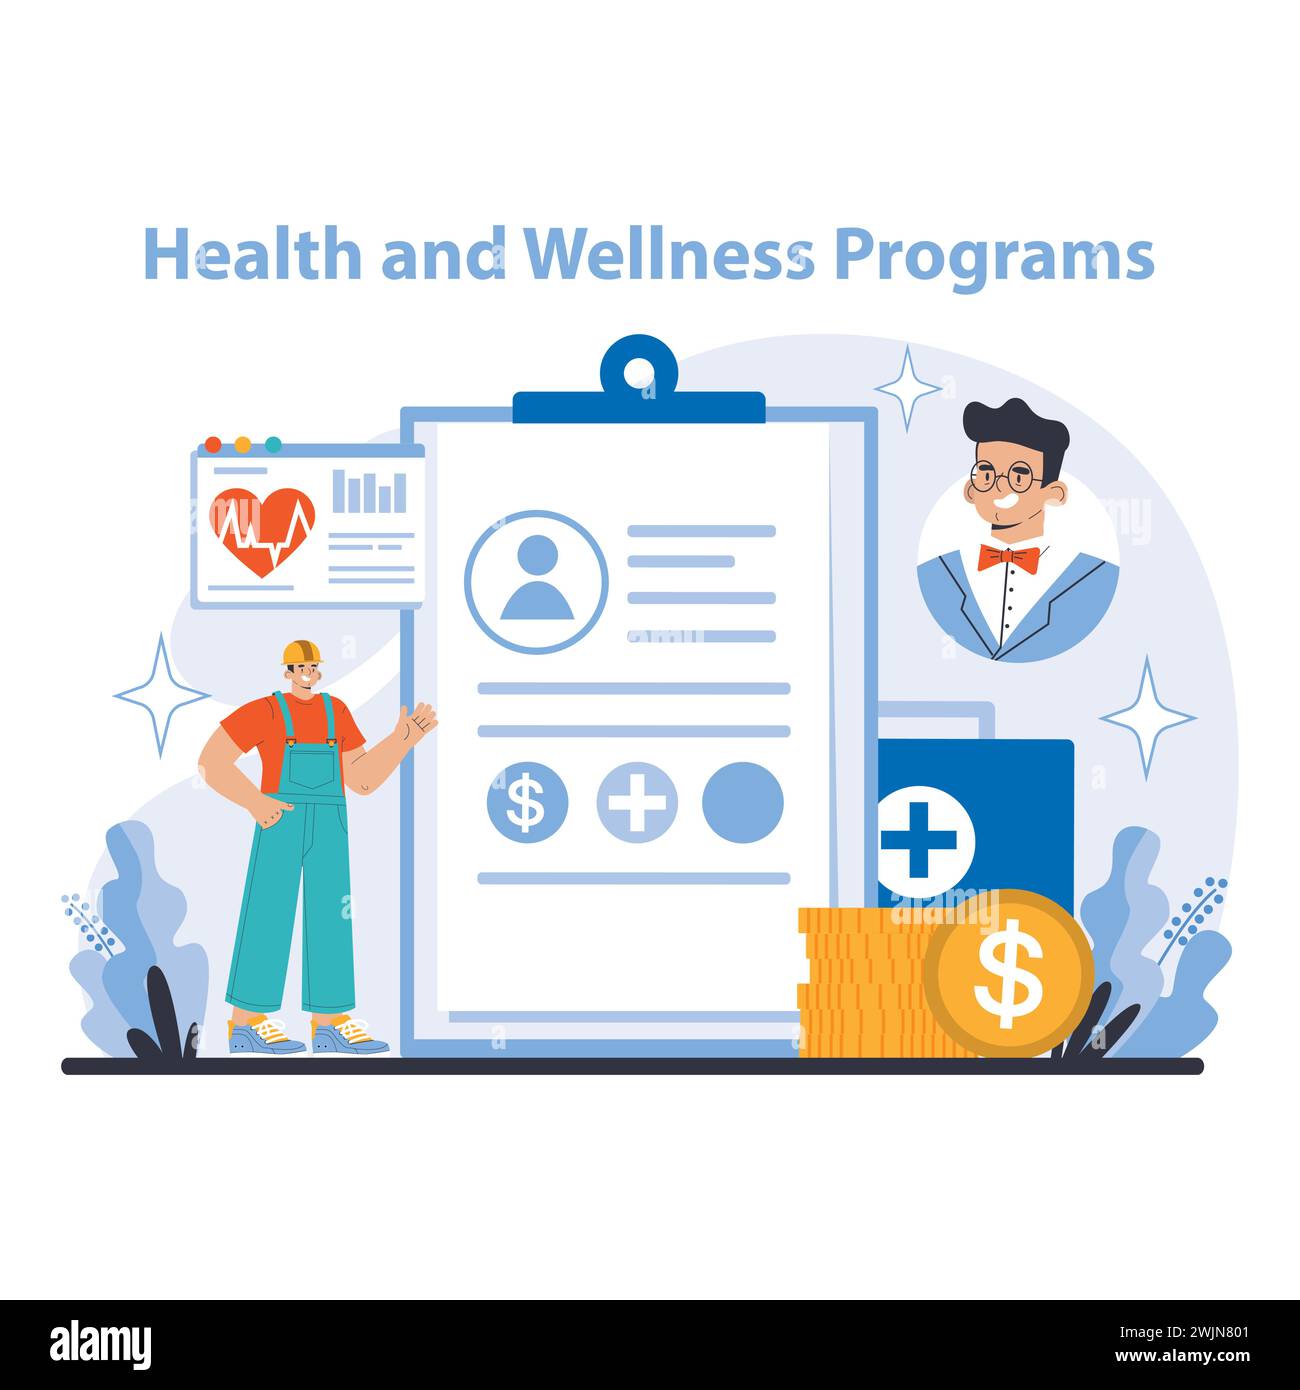 Health and Wellness Programs concept. A detailed depiction of employee health initiatives, financial planning for medical benefits, and wellness monitoring. Organizational care highlighted. Stock Vector